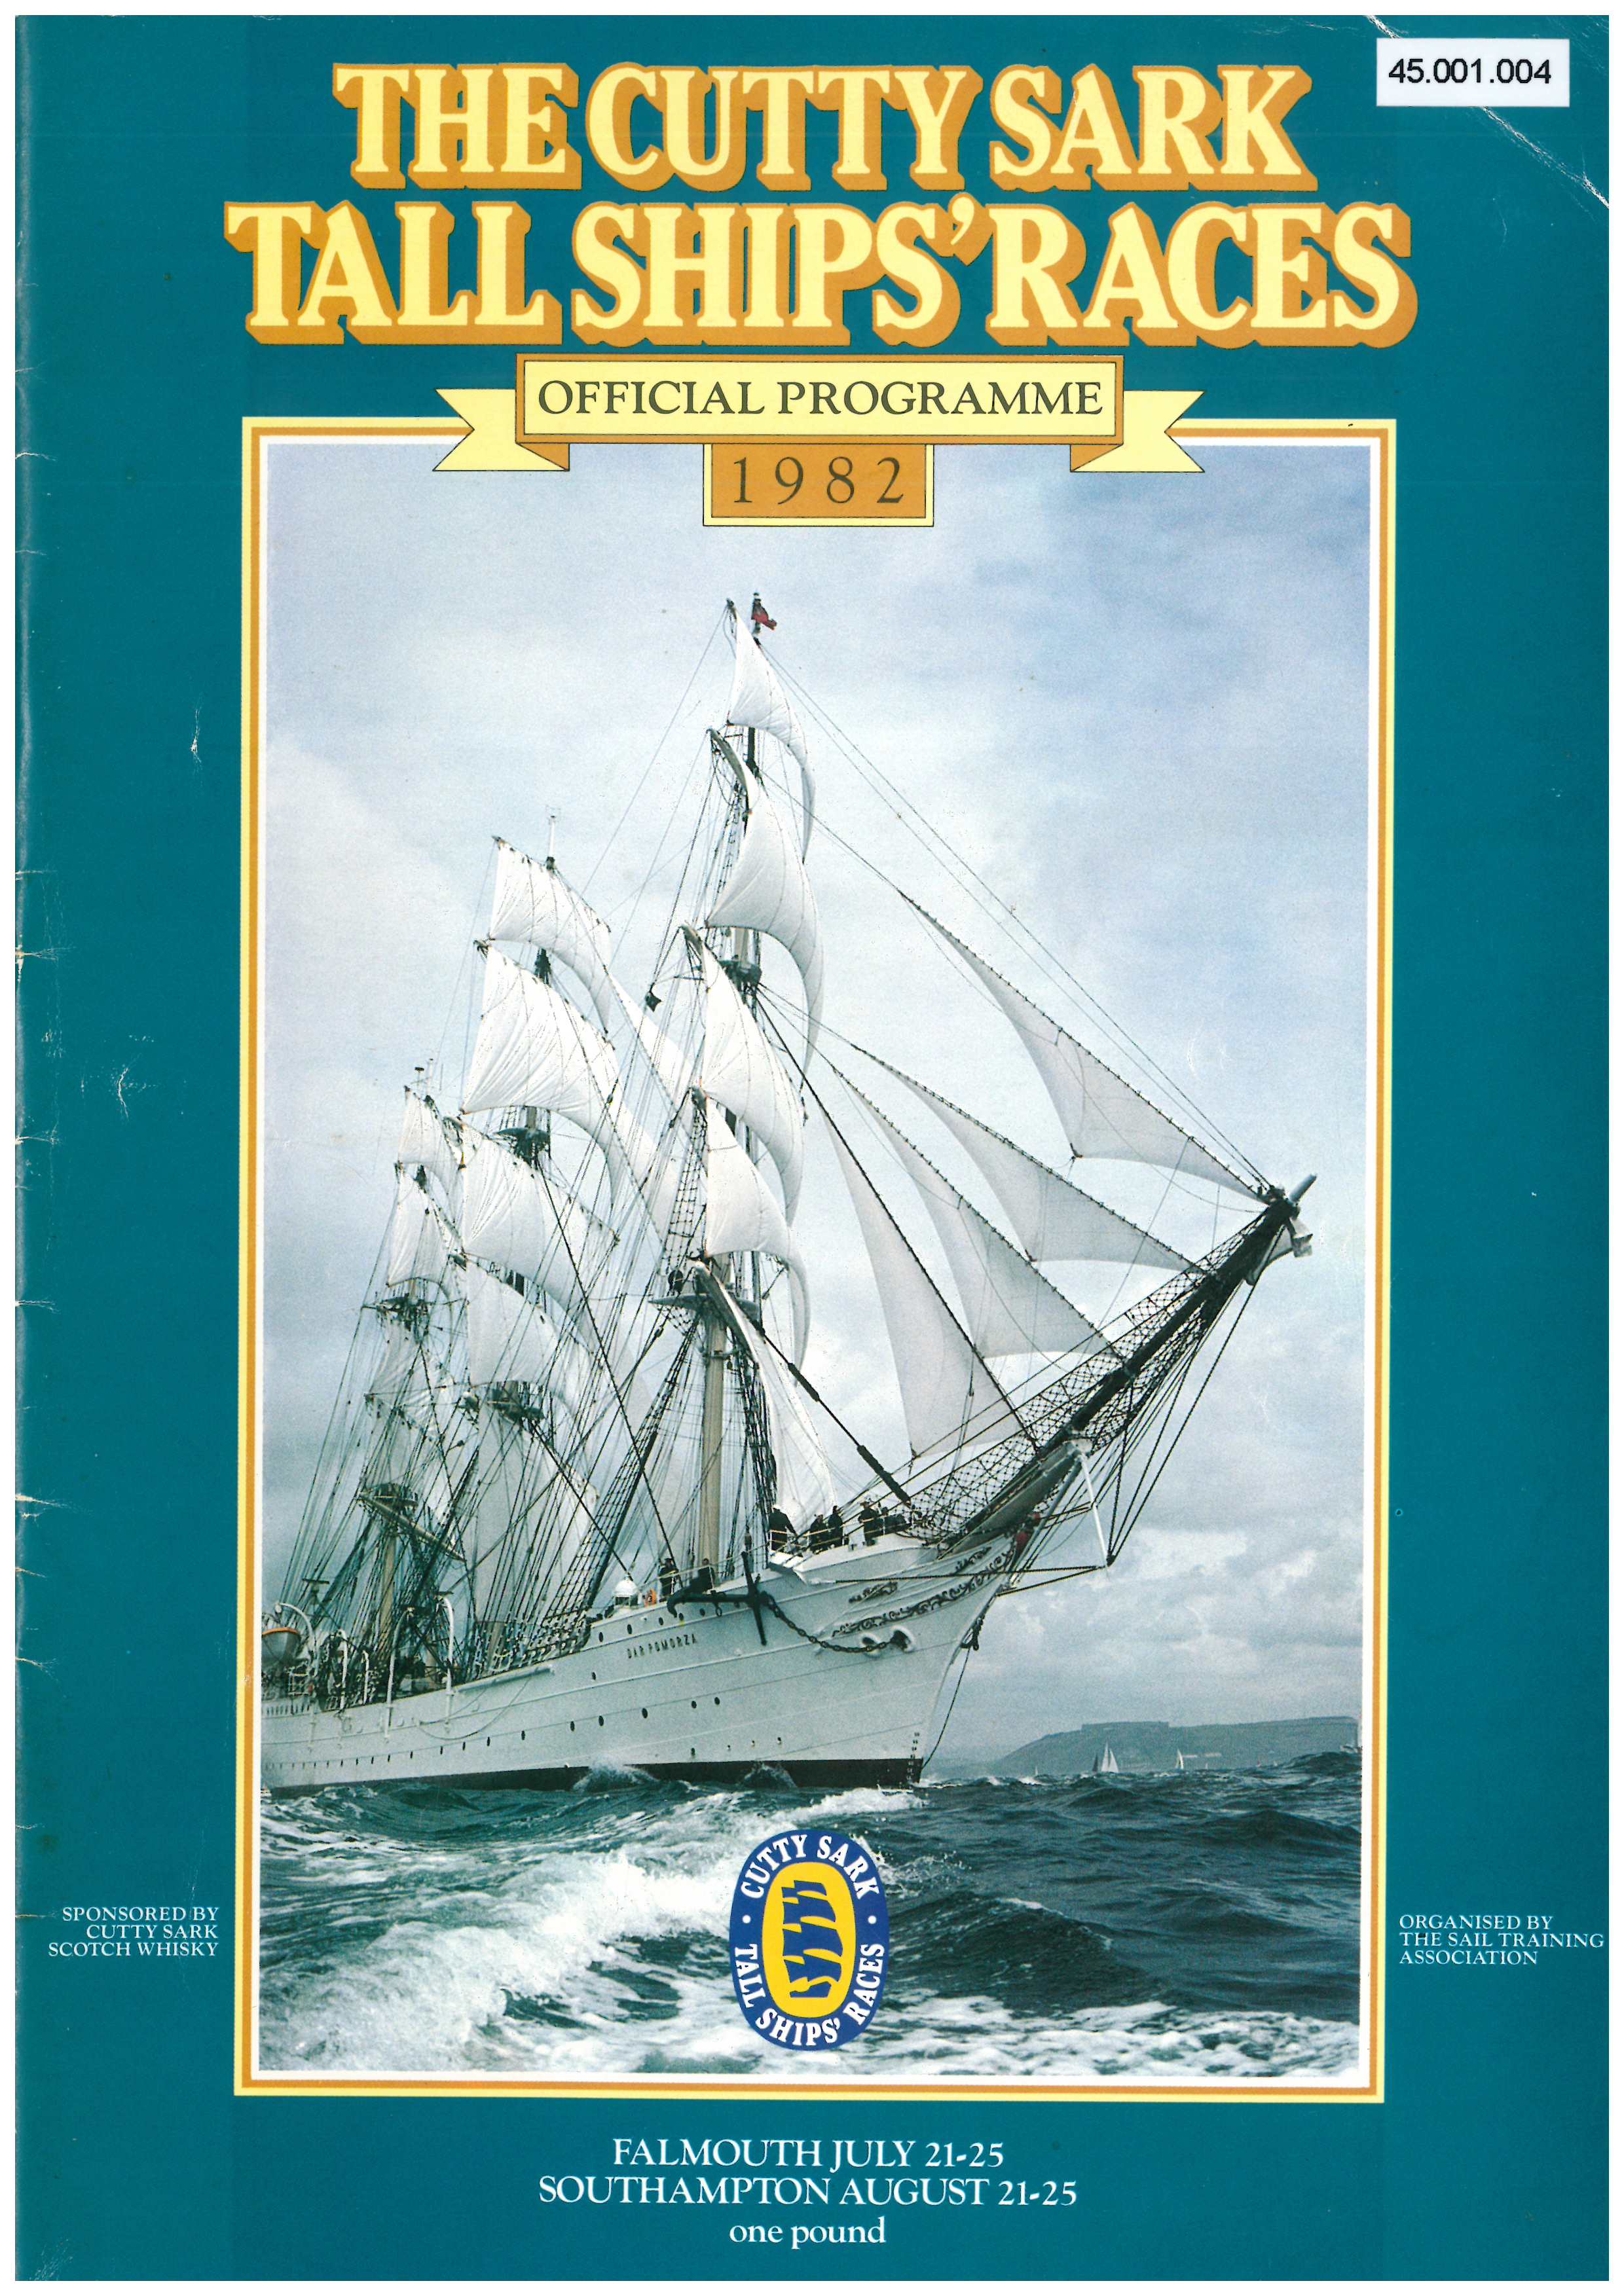 A scan of the official programme for the 1982 Cutty Sark Tall Ships Races from Falmouth. The scan is of the front cover, which features a photo of a white tall ship sailing on a dark blue sea.